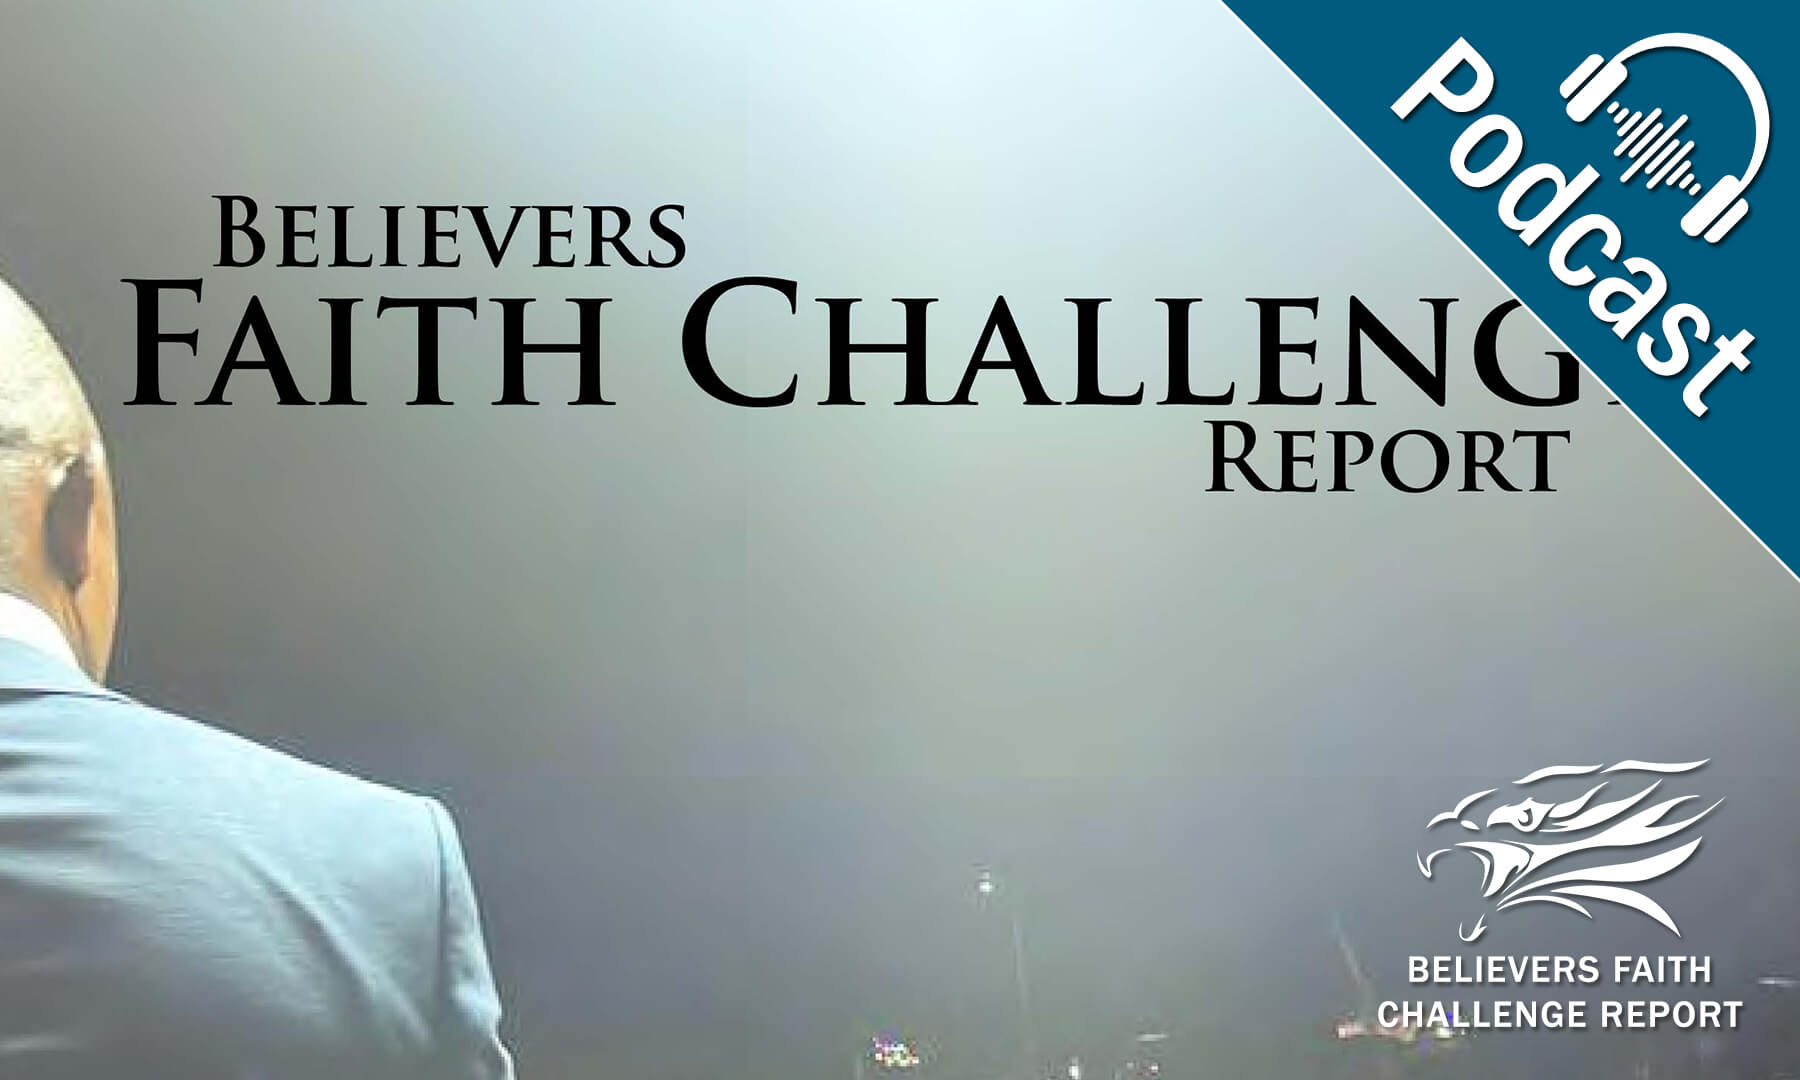 New Missions Podcast: Unboxing the latest Believers Faith Challenge Report